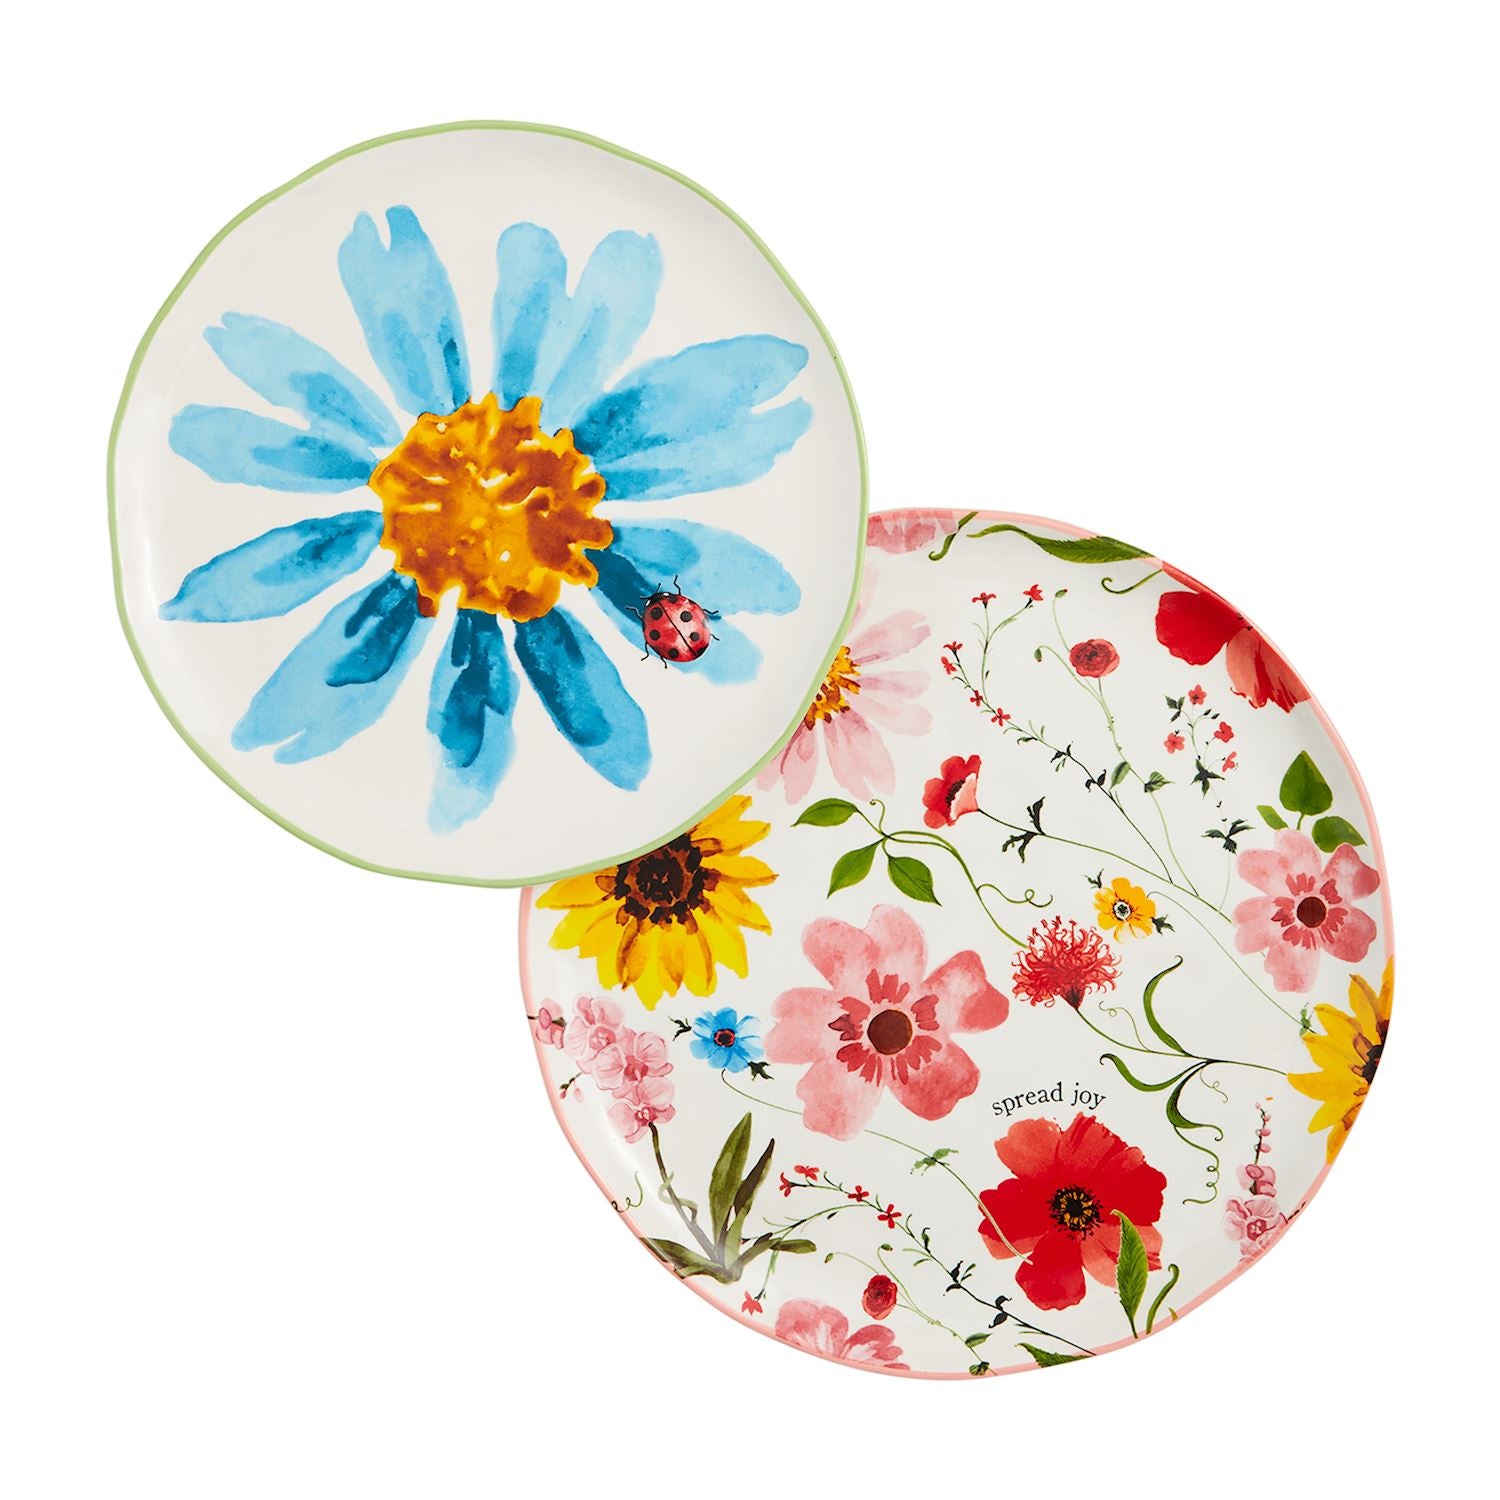 2 floral platters on a white background.